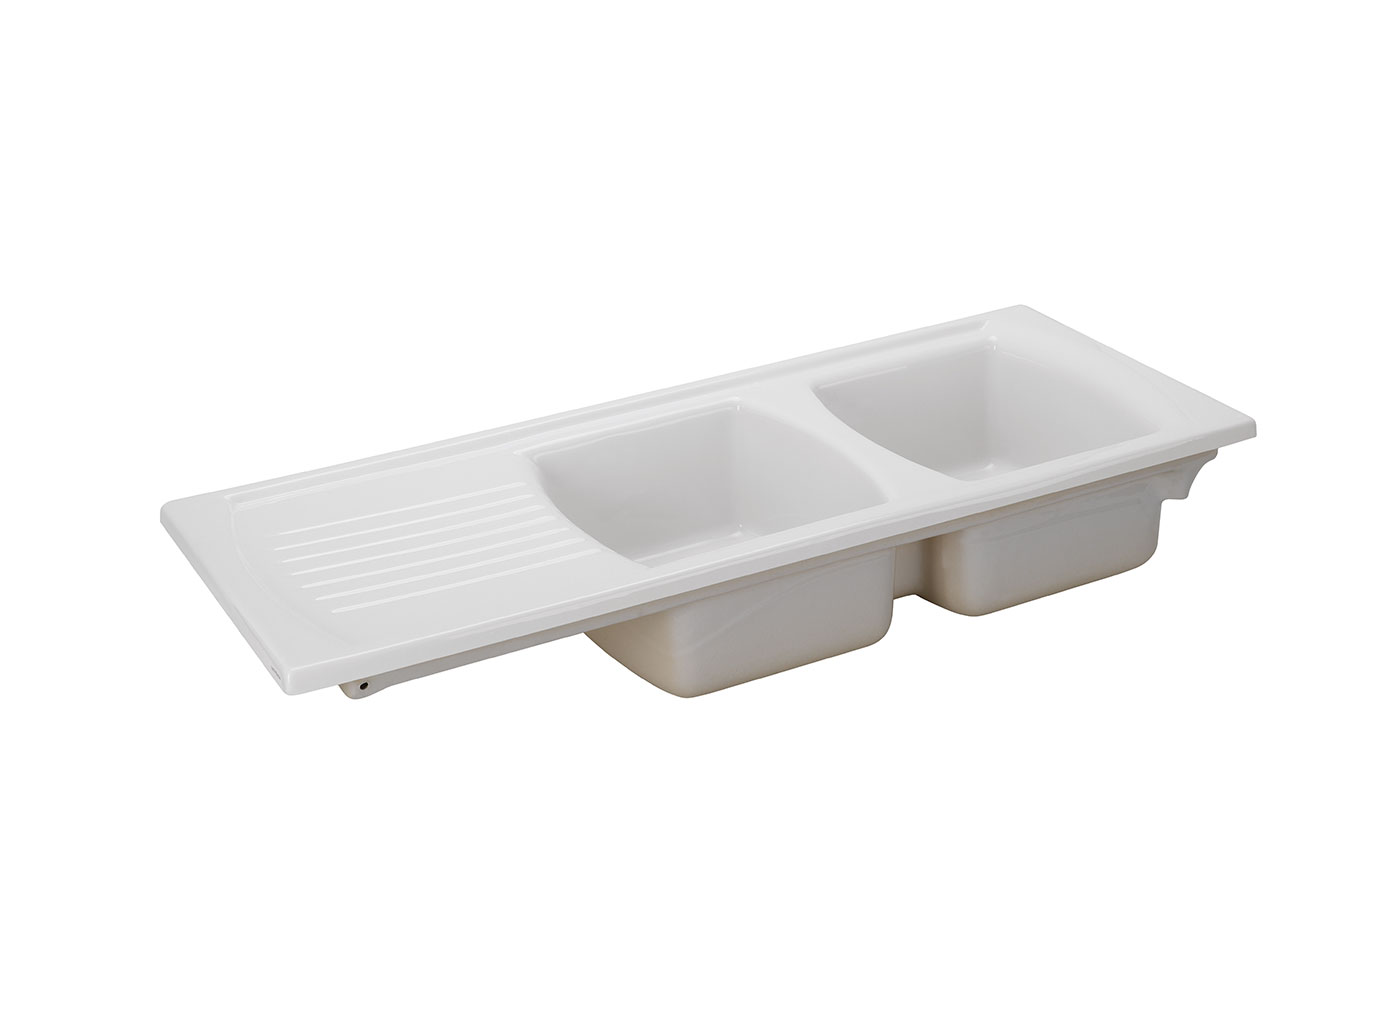 The Lusitano is a great luxury alternative to a stainless steel sink boasting two large bowls and a drainer. Made in Europe the high quality fireclay and glazing is highly durable